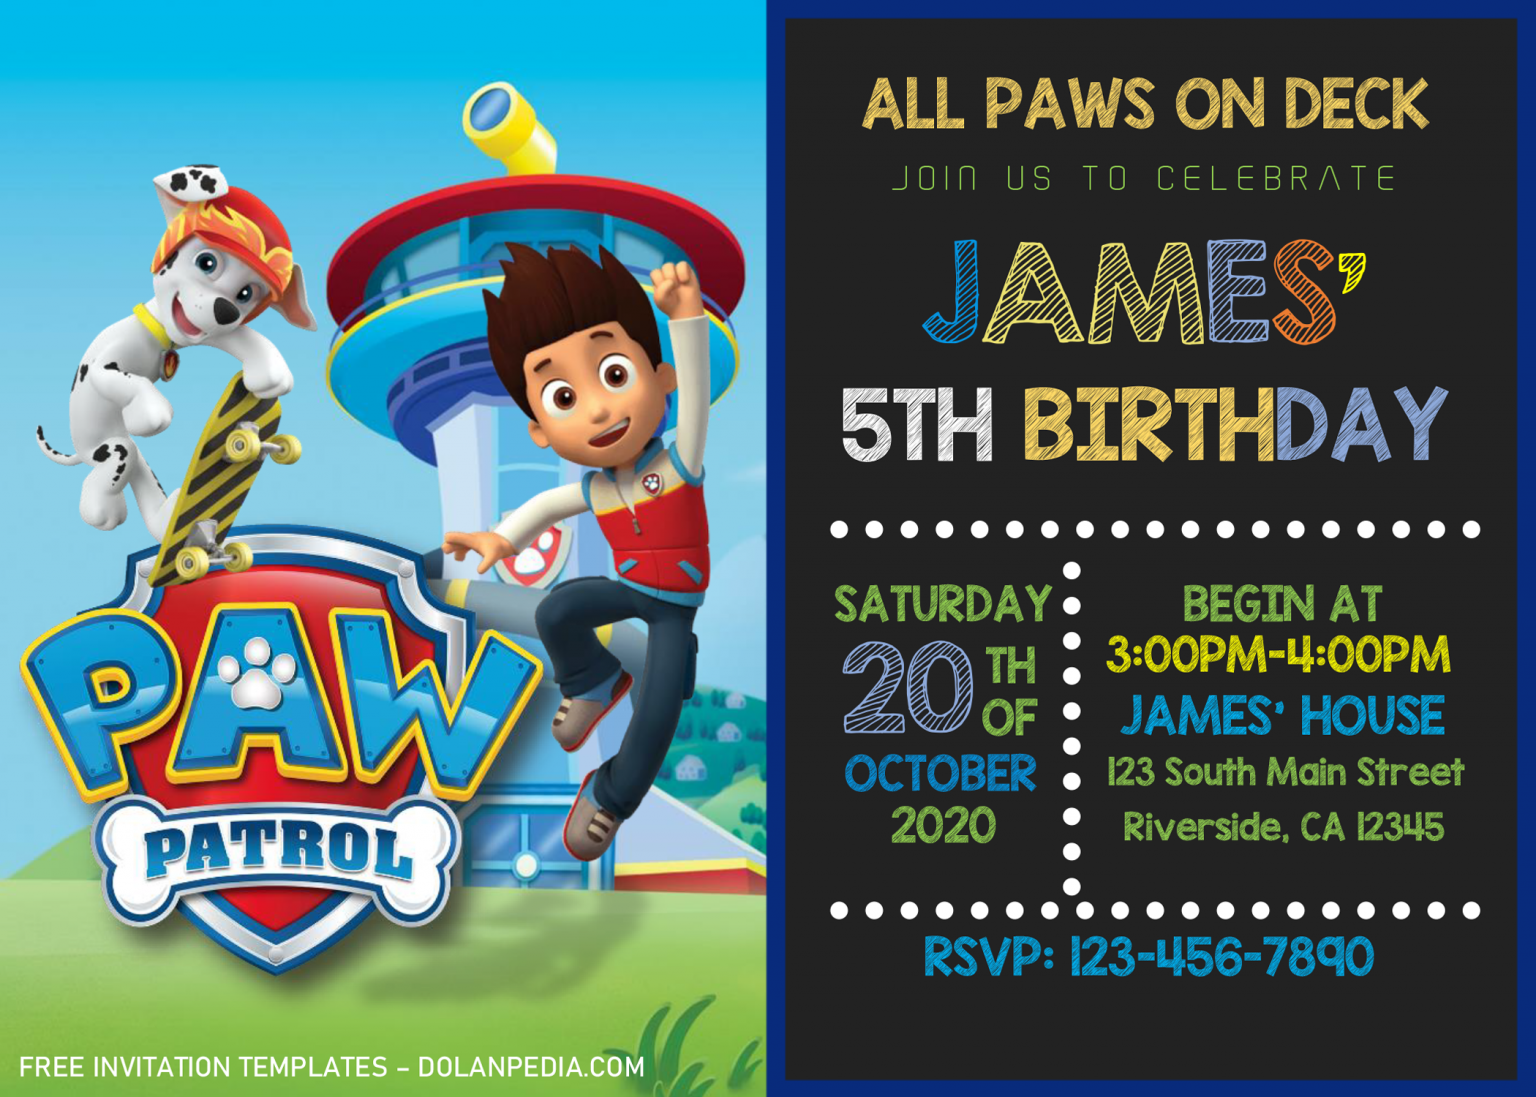 paw patrol microsoft office templates for word